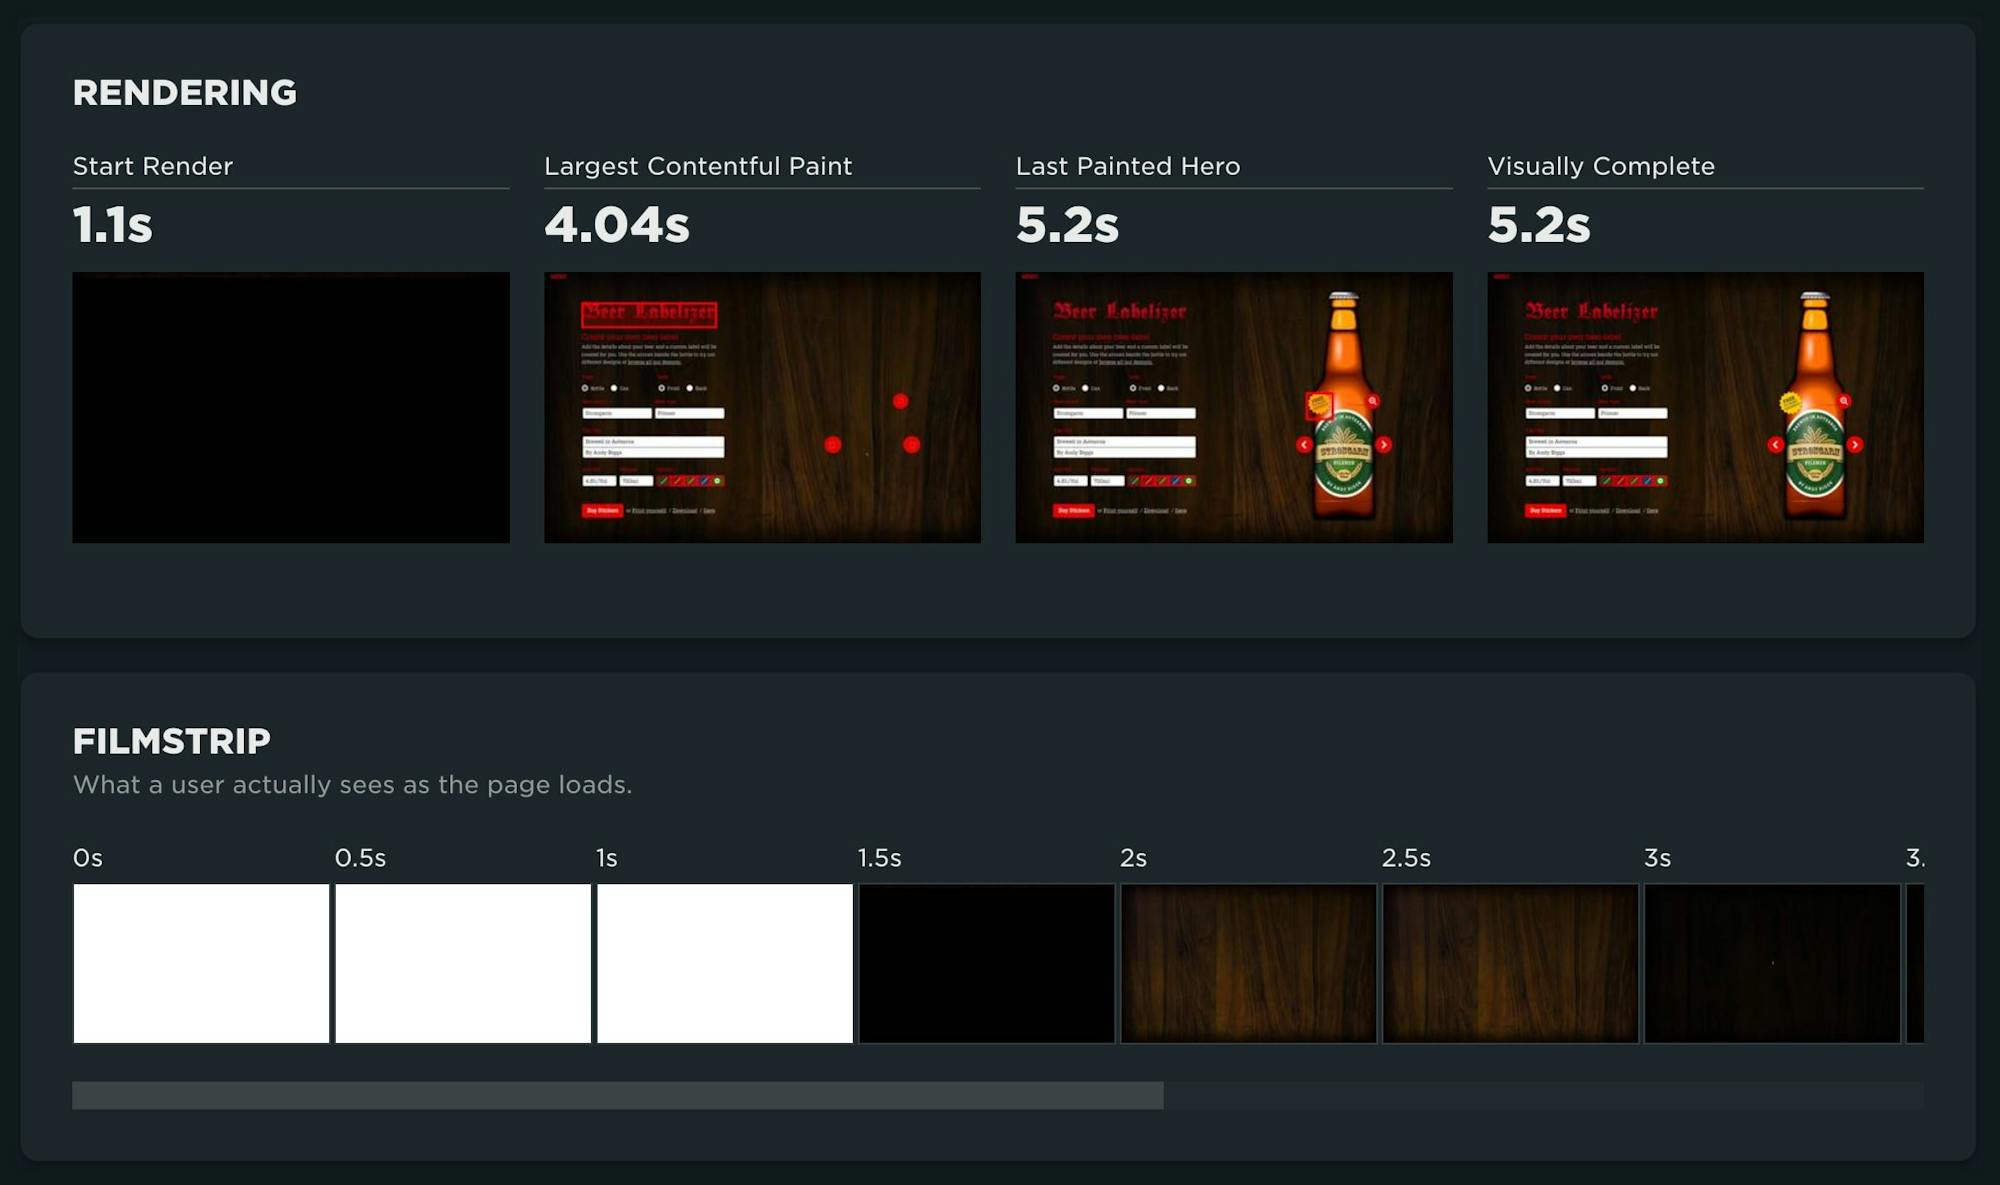 Page dashboard illustrating key rendering times for the page as well as full filmstrip.